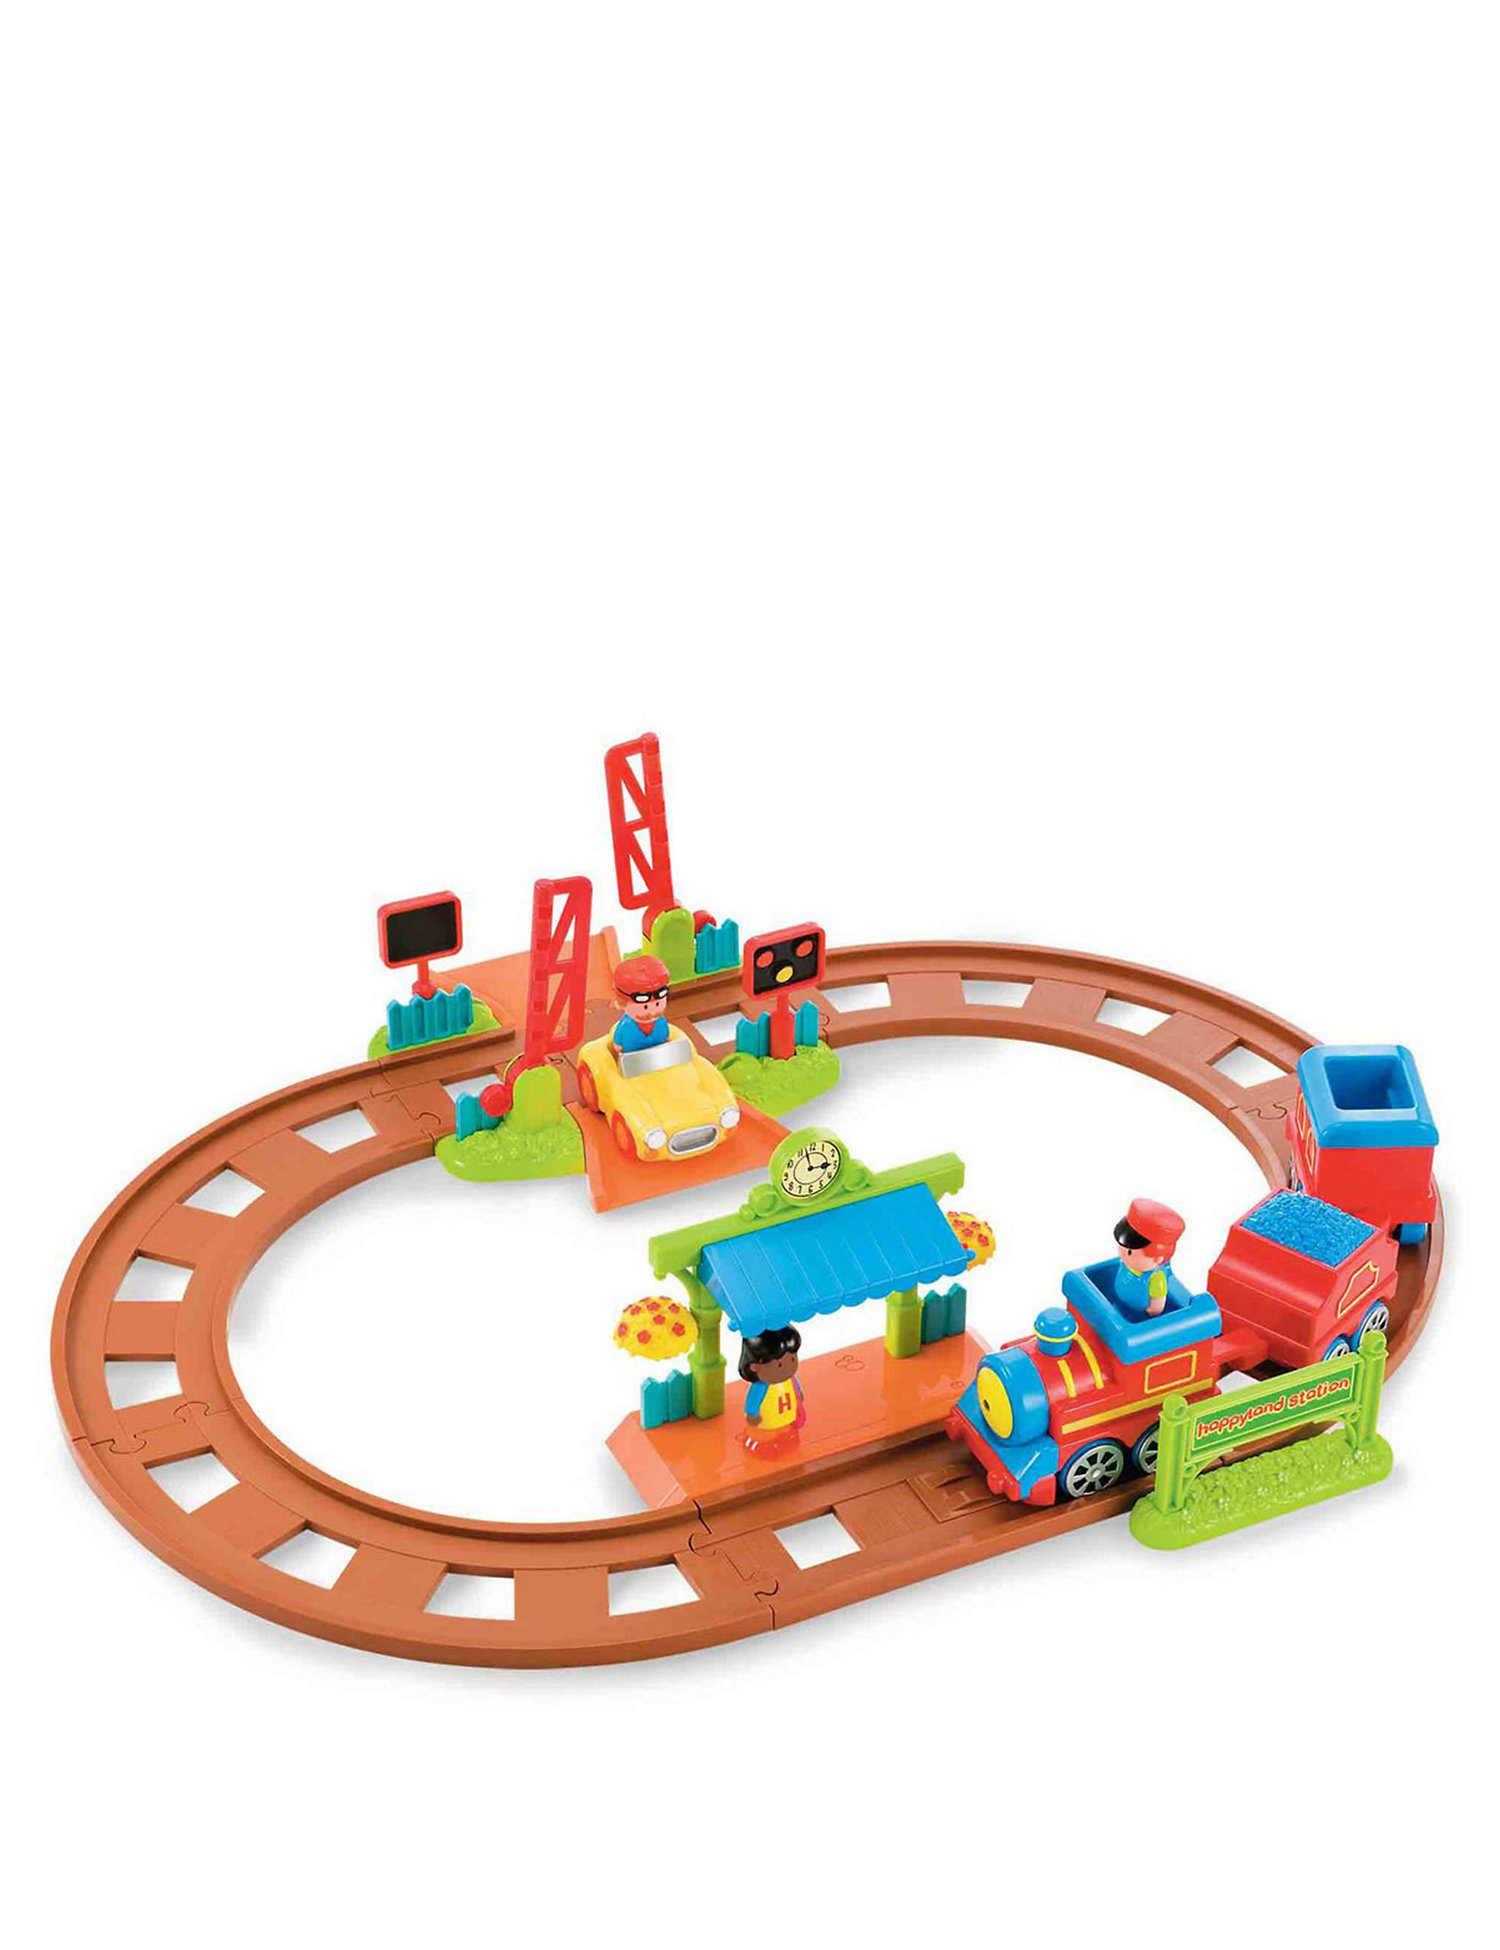 An Early Learning Centre Happyland Magic Motion Train Set that features brown tracks, red and blue train cars, one yellow automobile, and red and green accessories